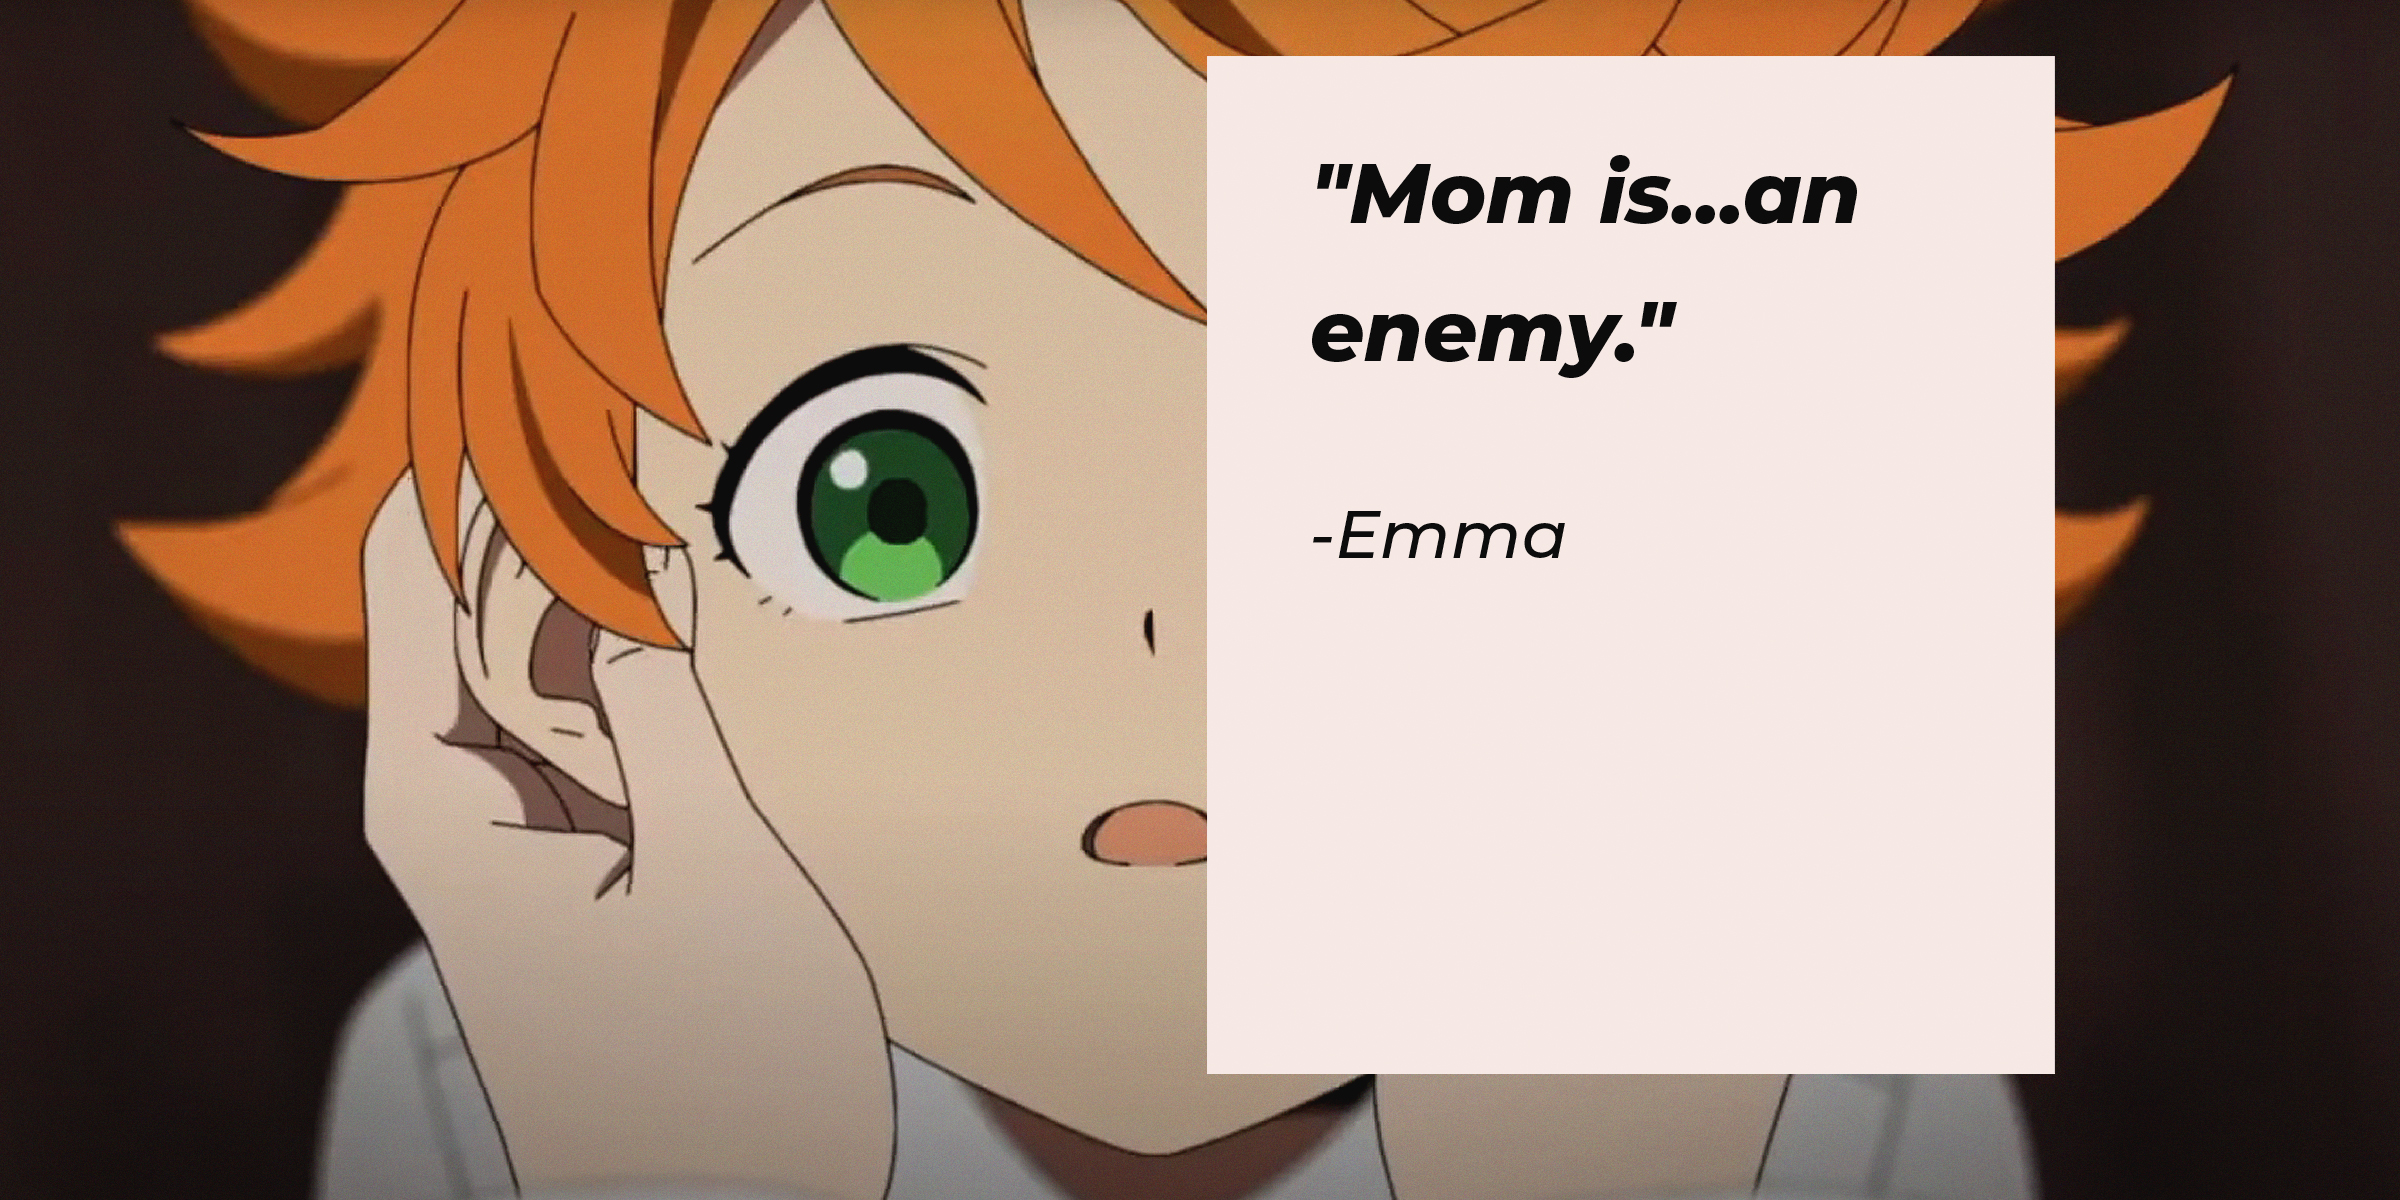 Source: Facebook.com/neverland.anime | Photo of Emma with the quote: "Mom is... an enemy."